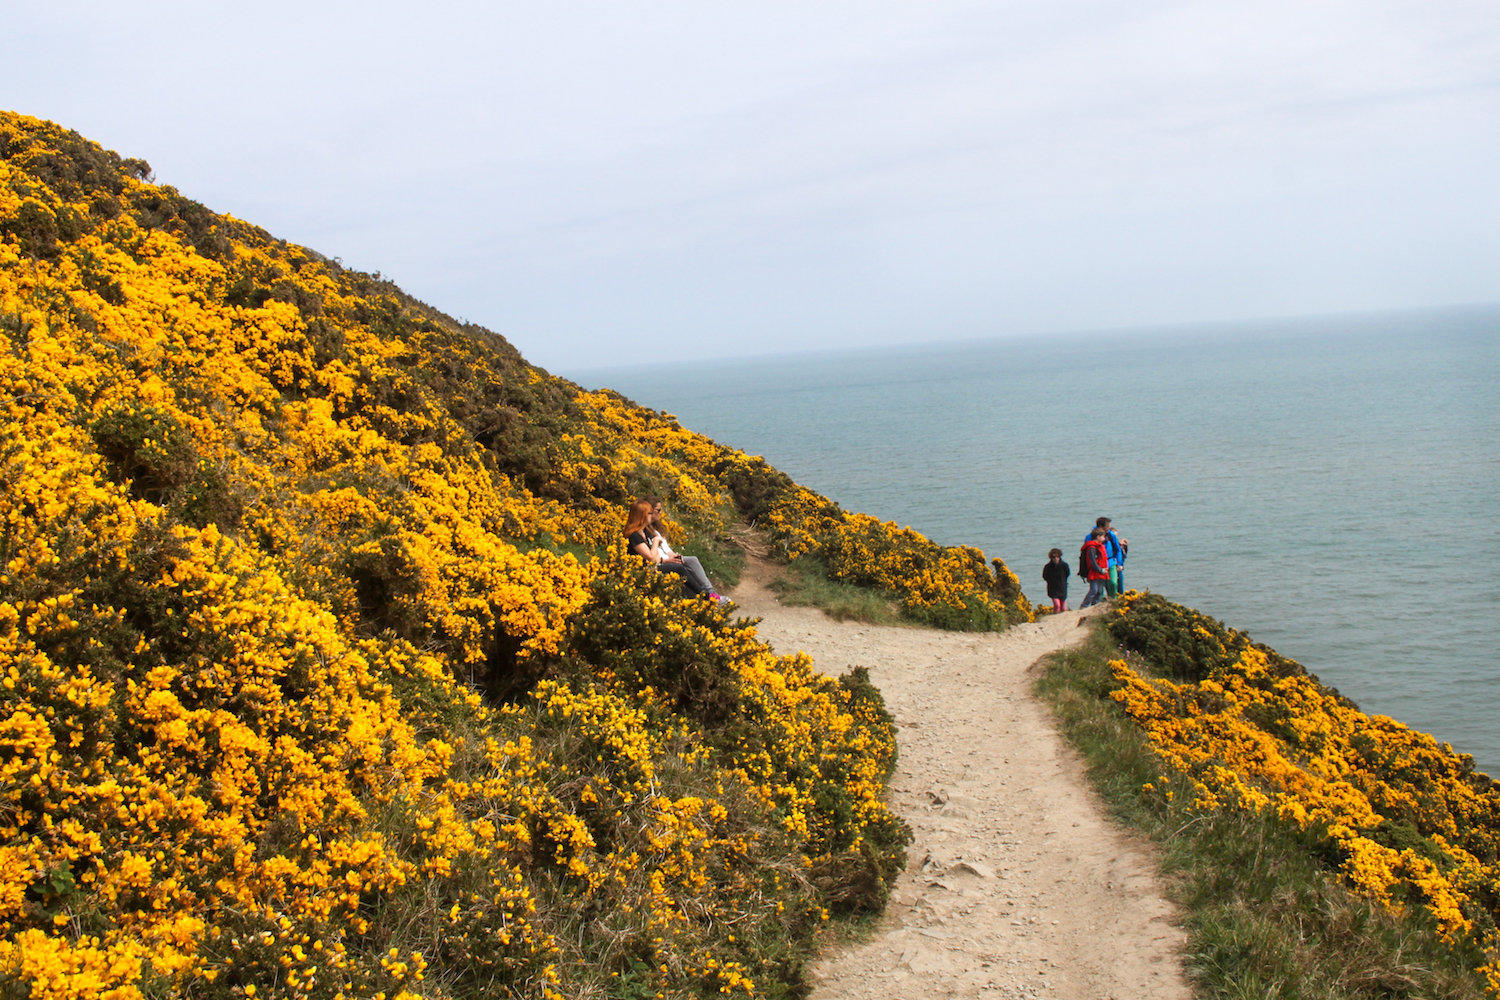 Trail along the cliffs of Howth (Eat Me. Drink Me.)